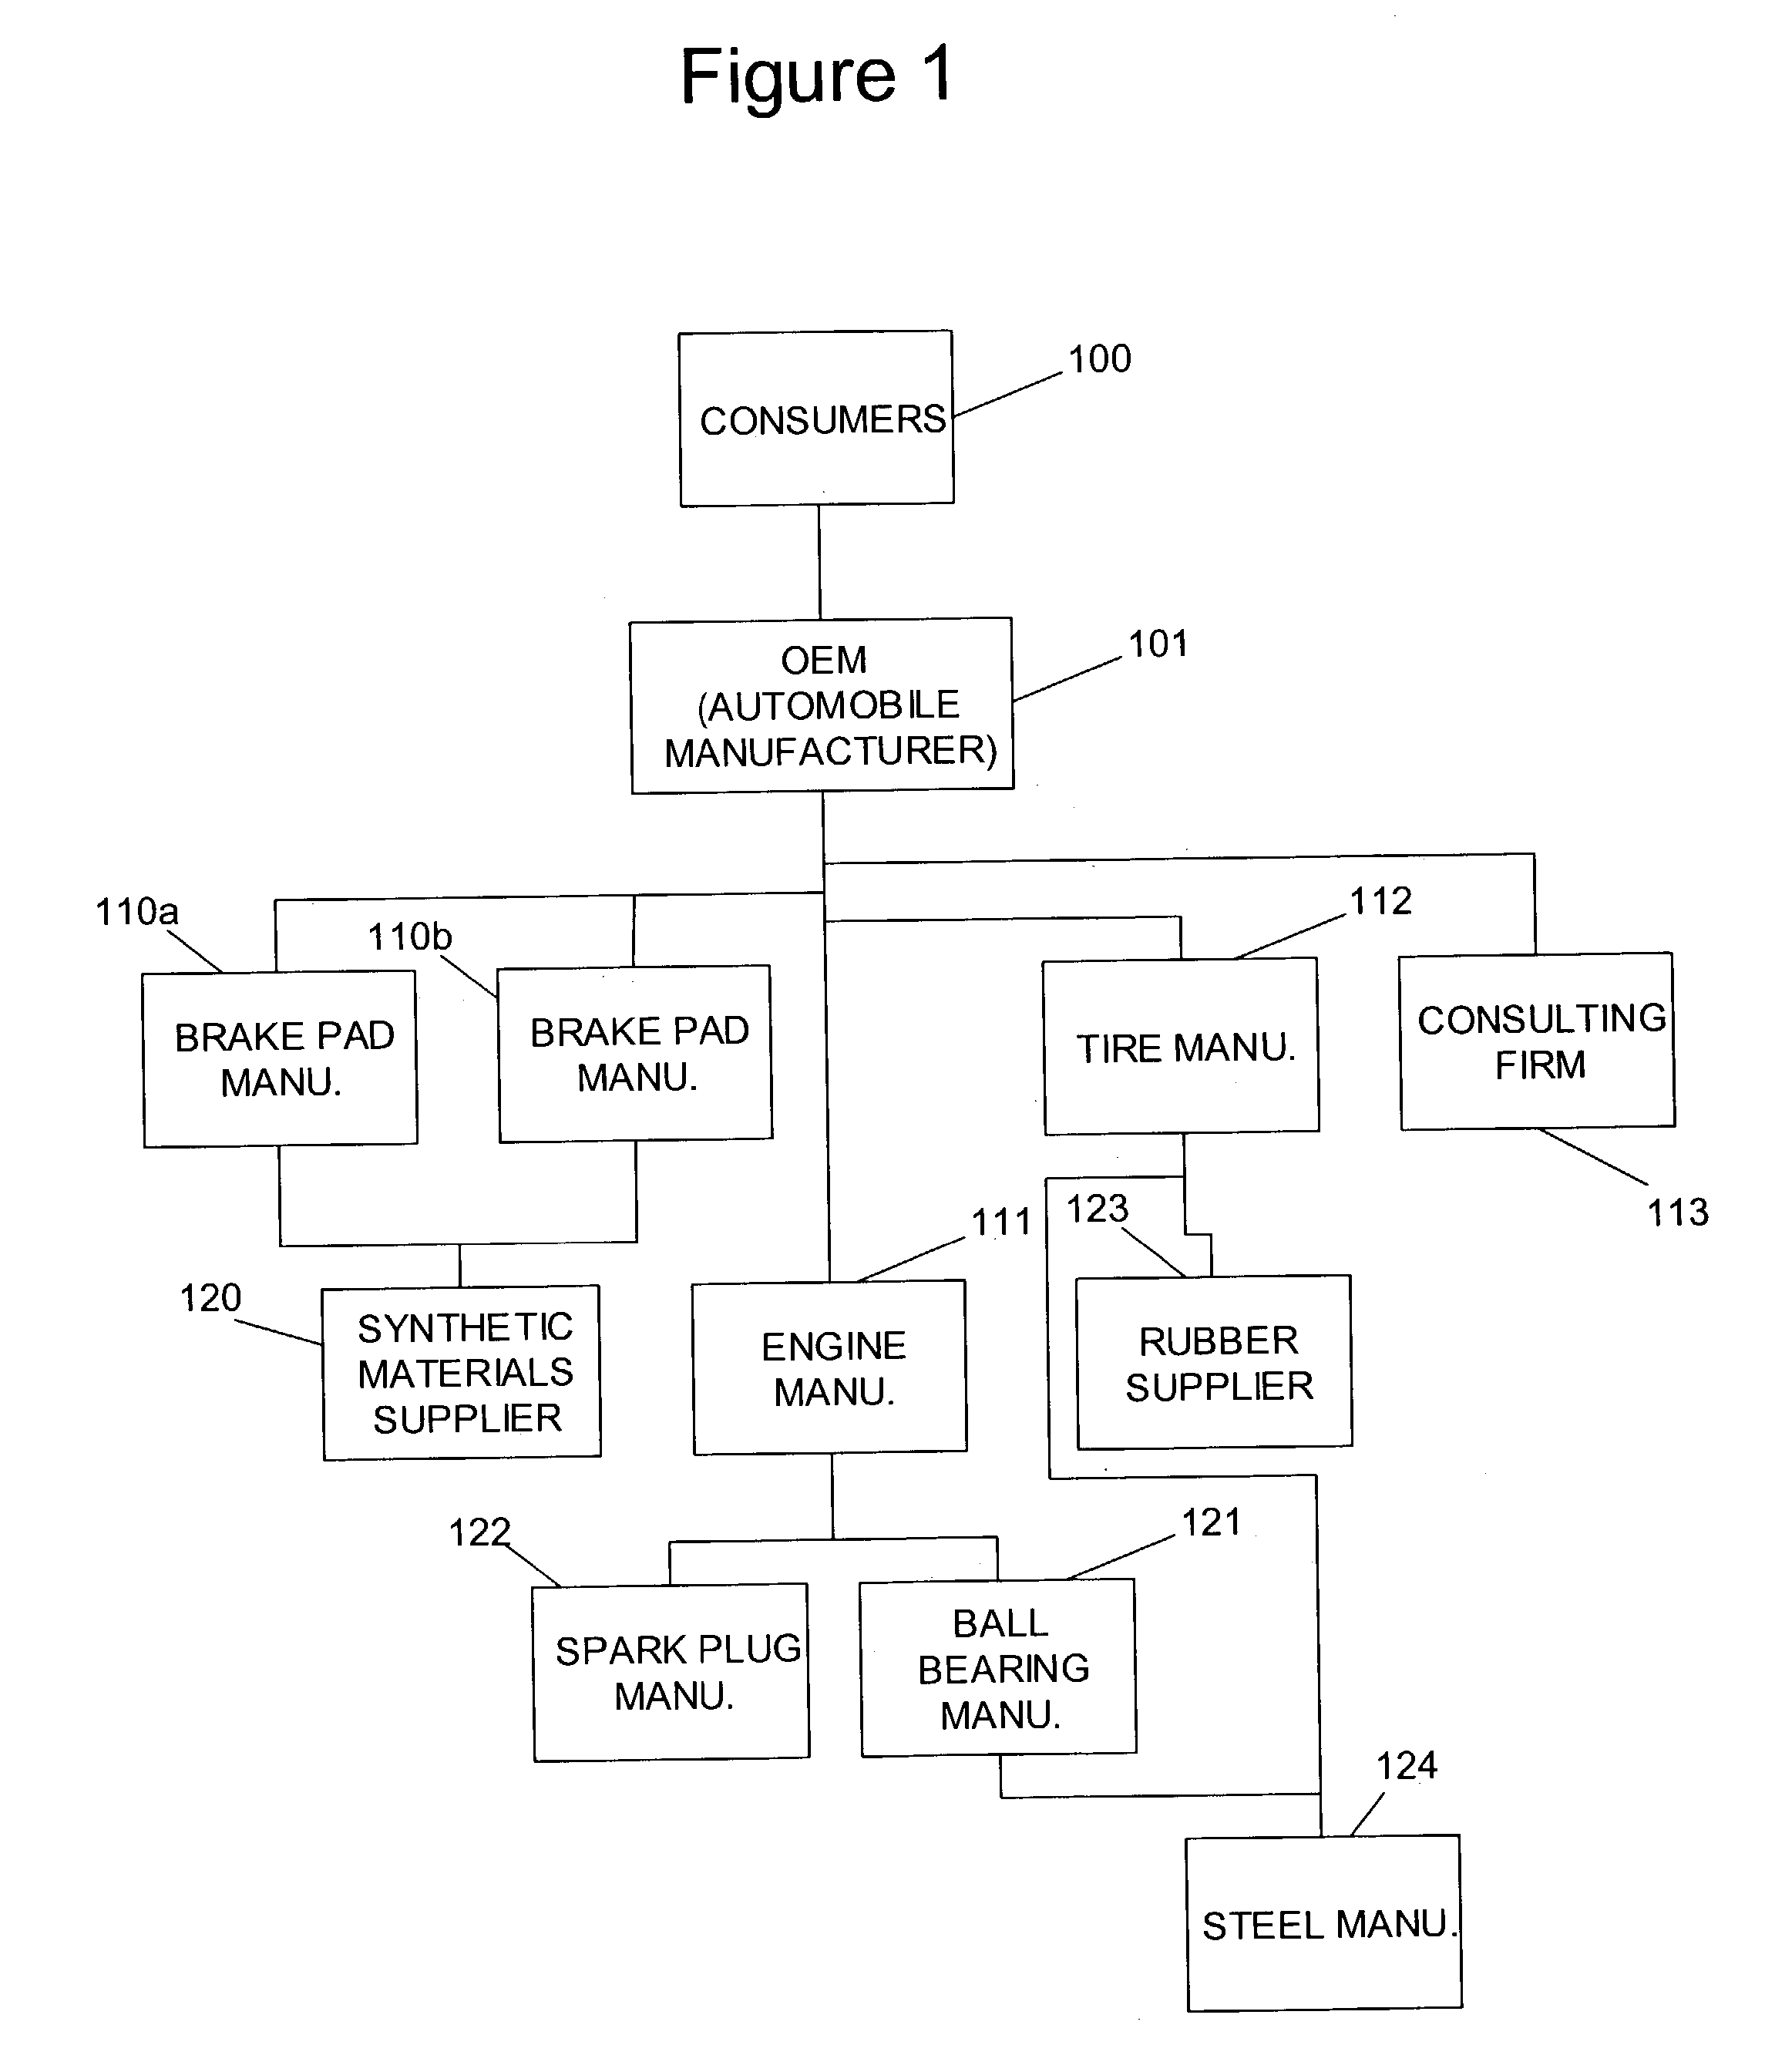 Method and system for business information networks